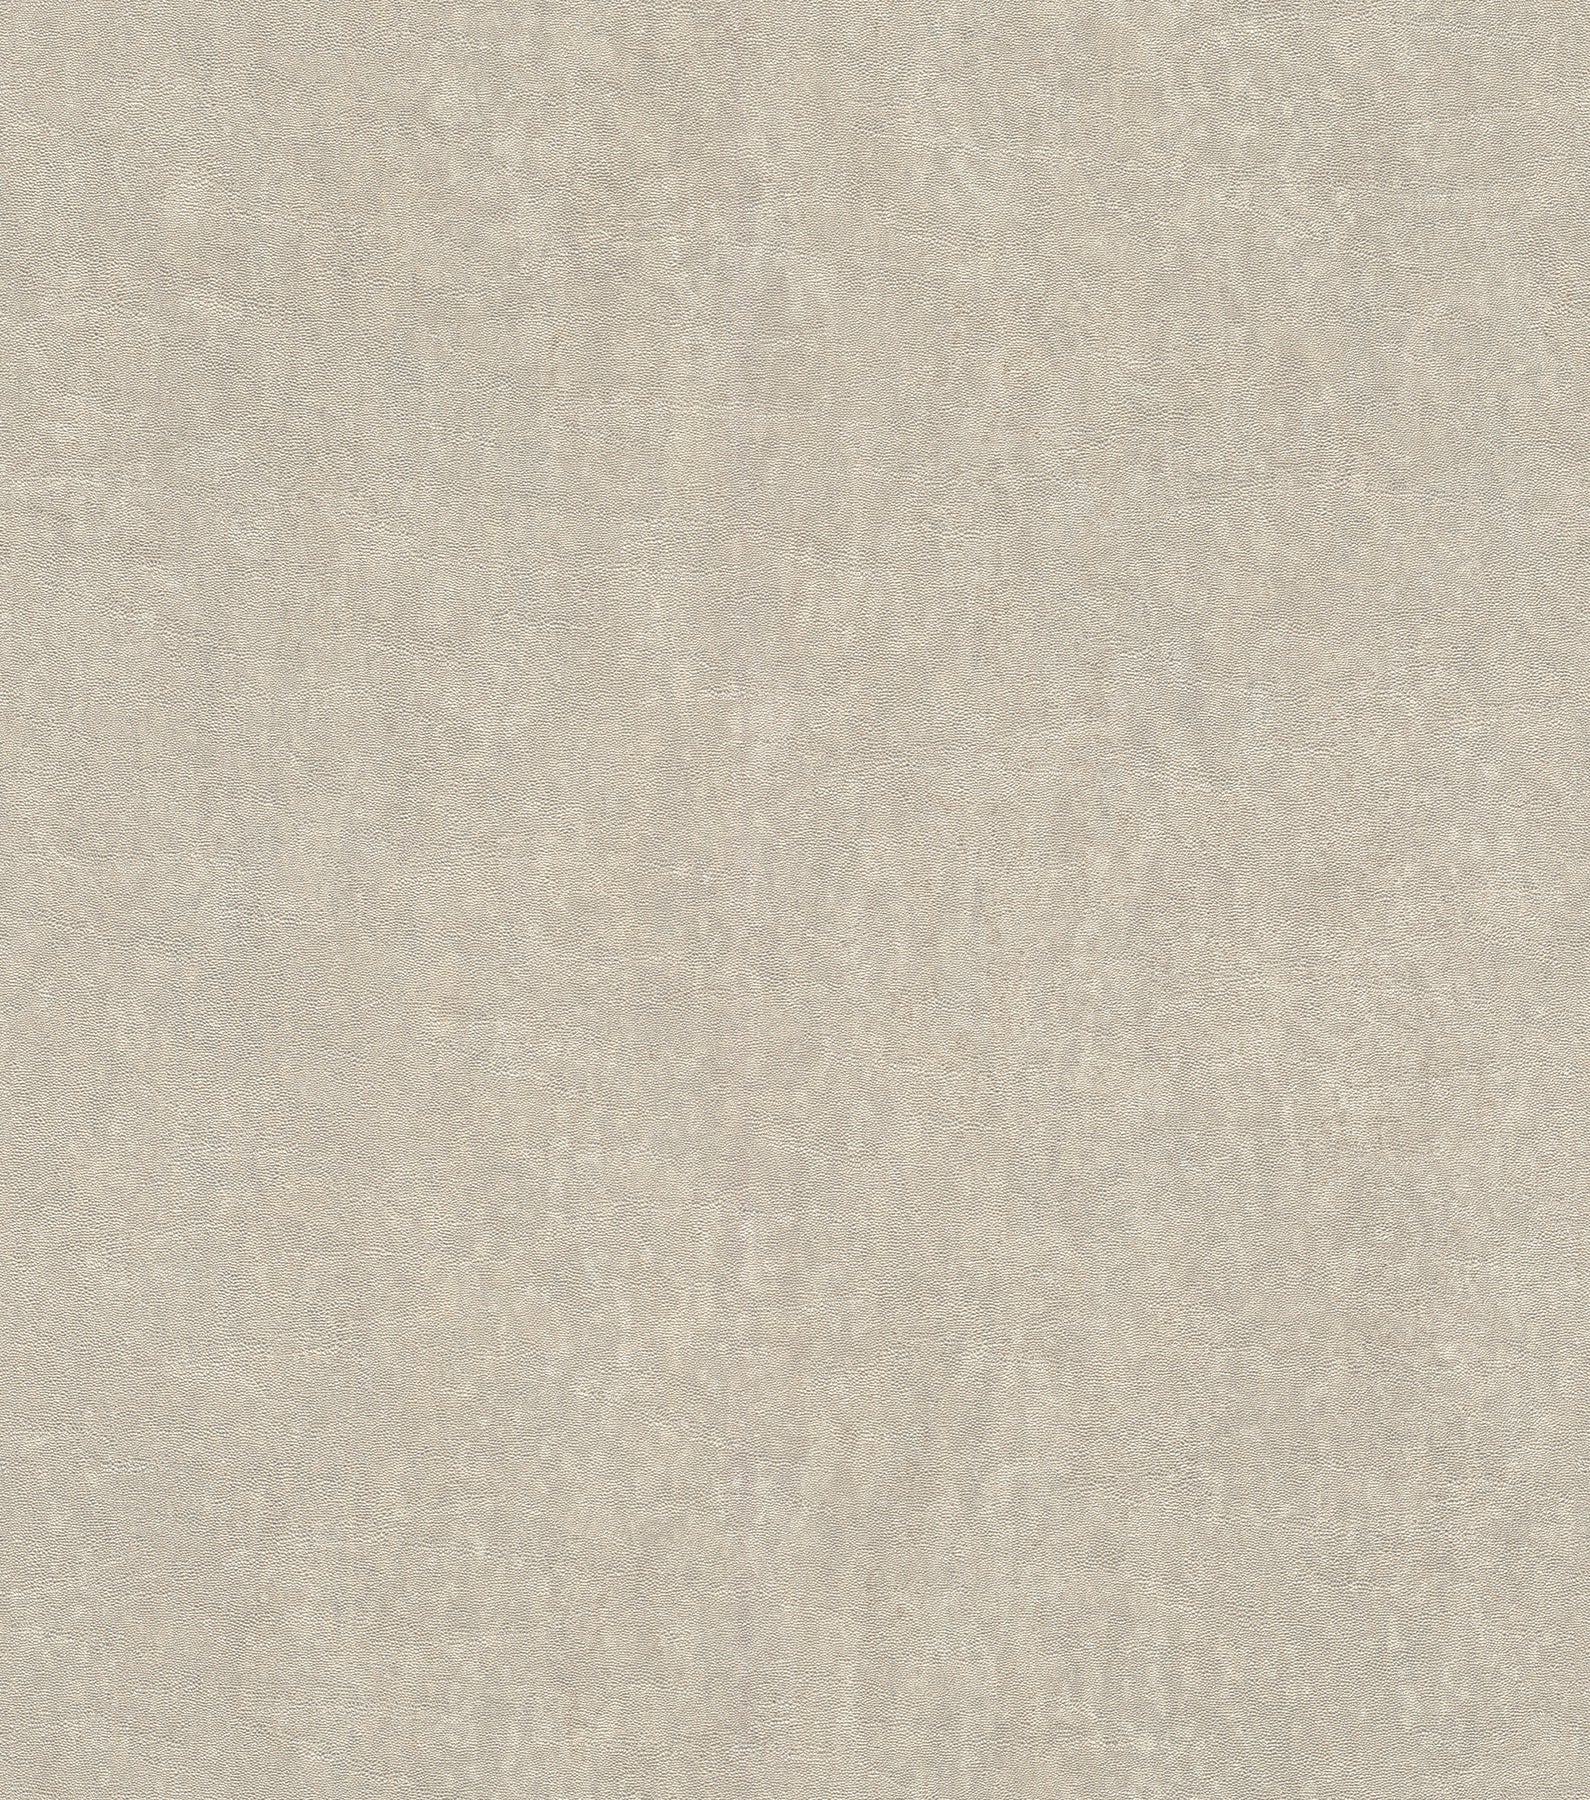 Search 4015-550023 Beyond Textures Segwick Taupe Speckled Texture Taupe by Advantage